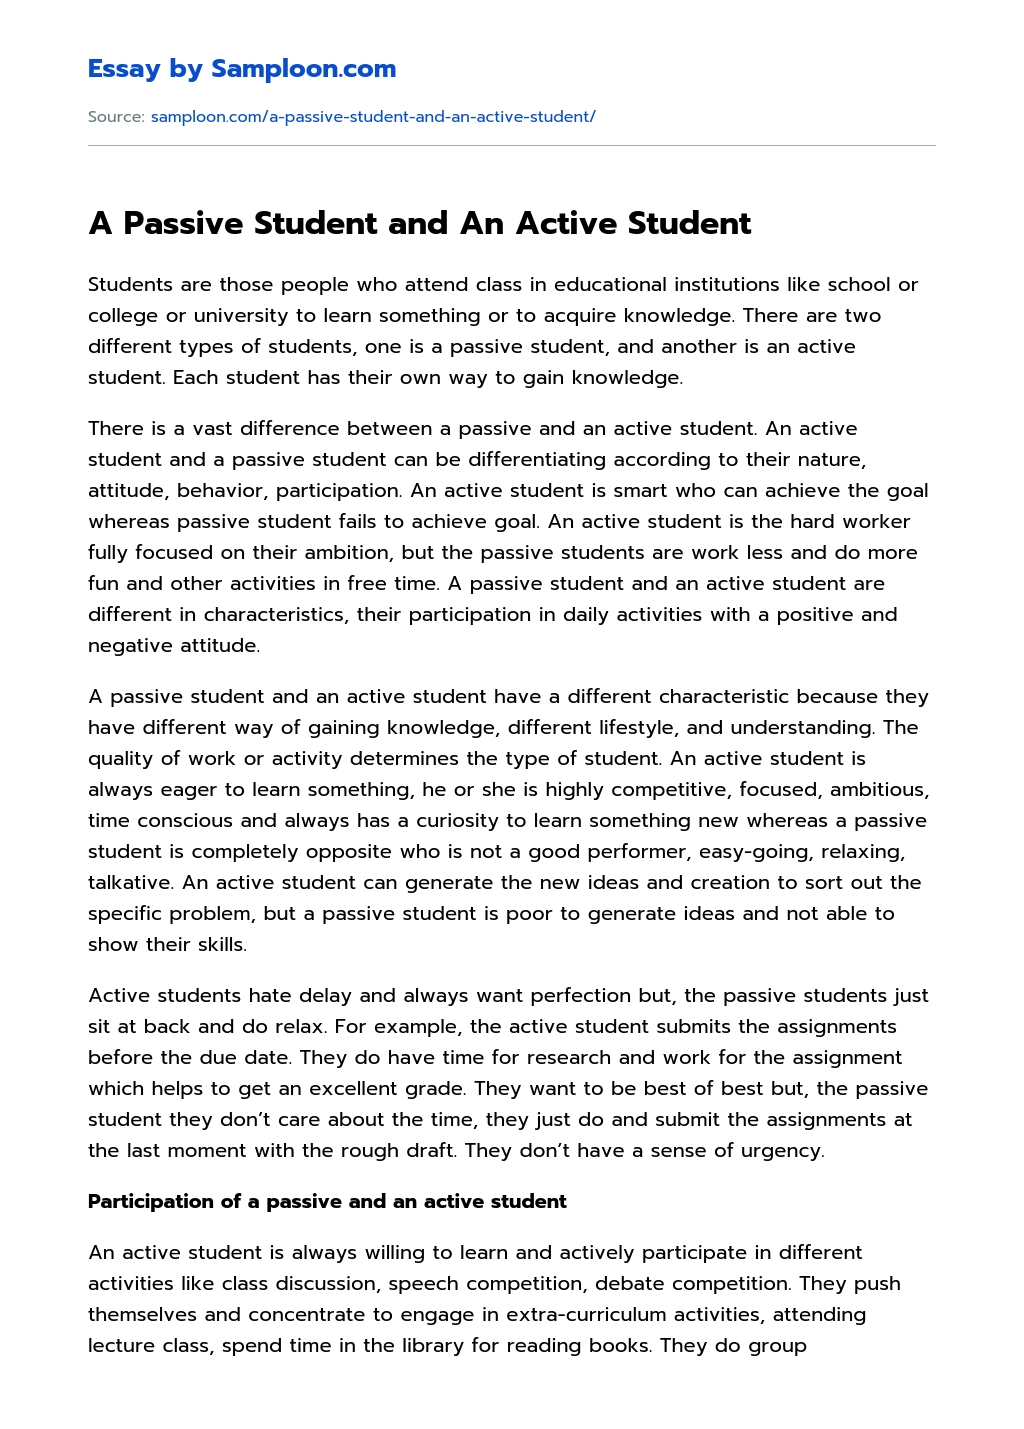 A Passive Student and An Active Student essay